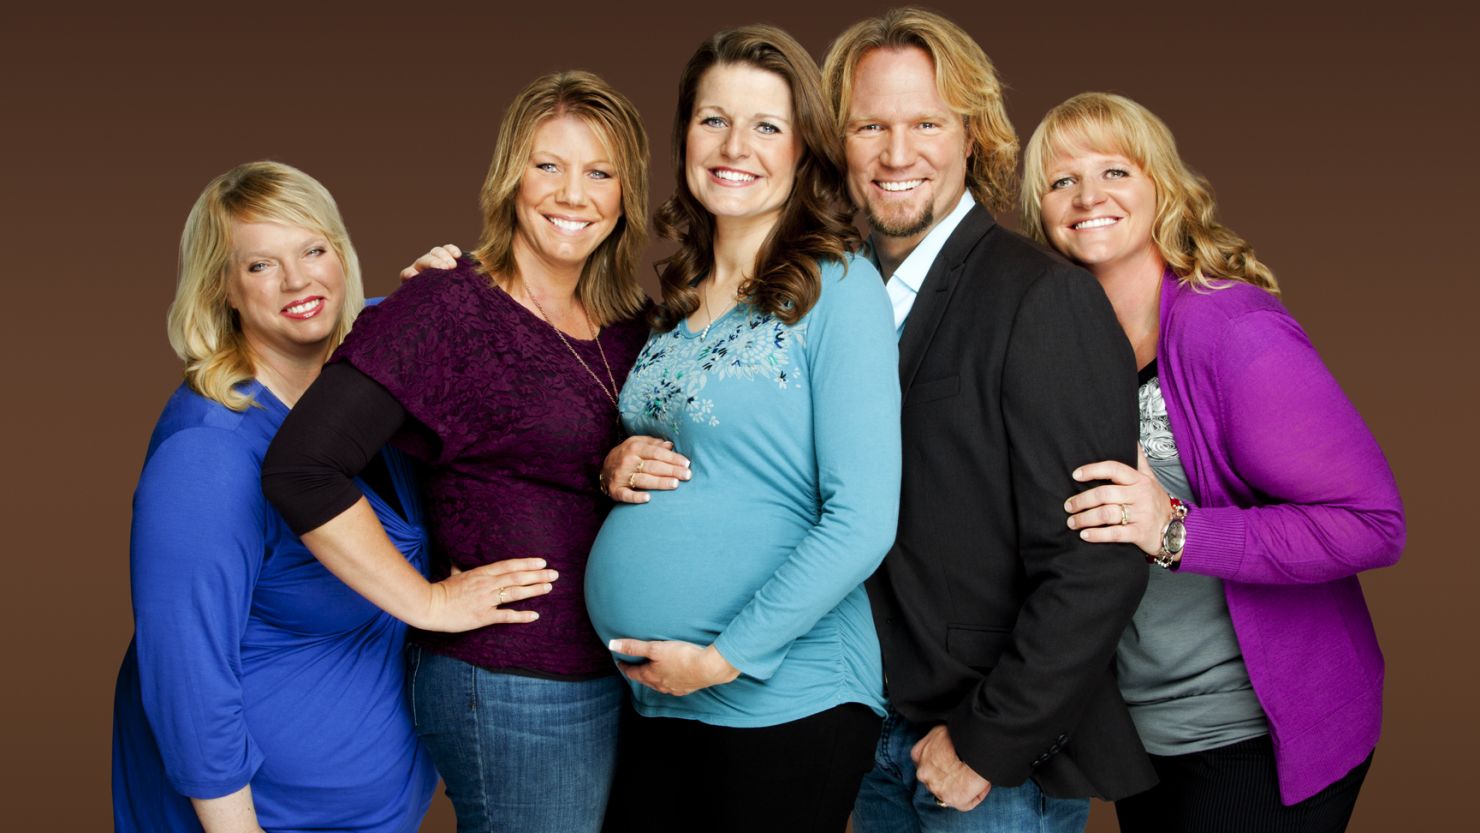 Sister Wives' star divorces one wife, marries another | CNN